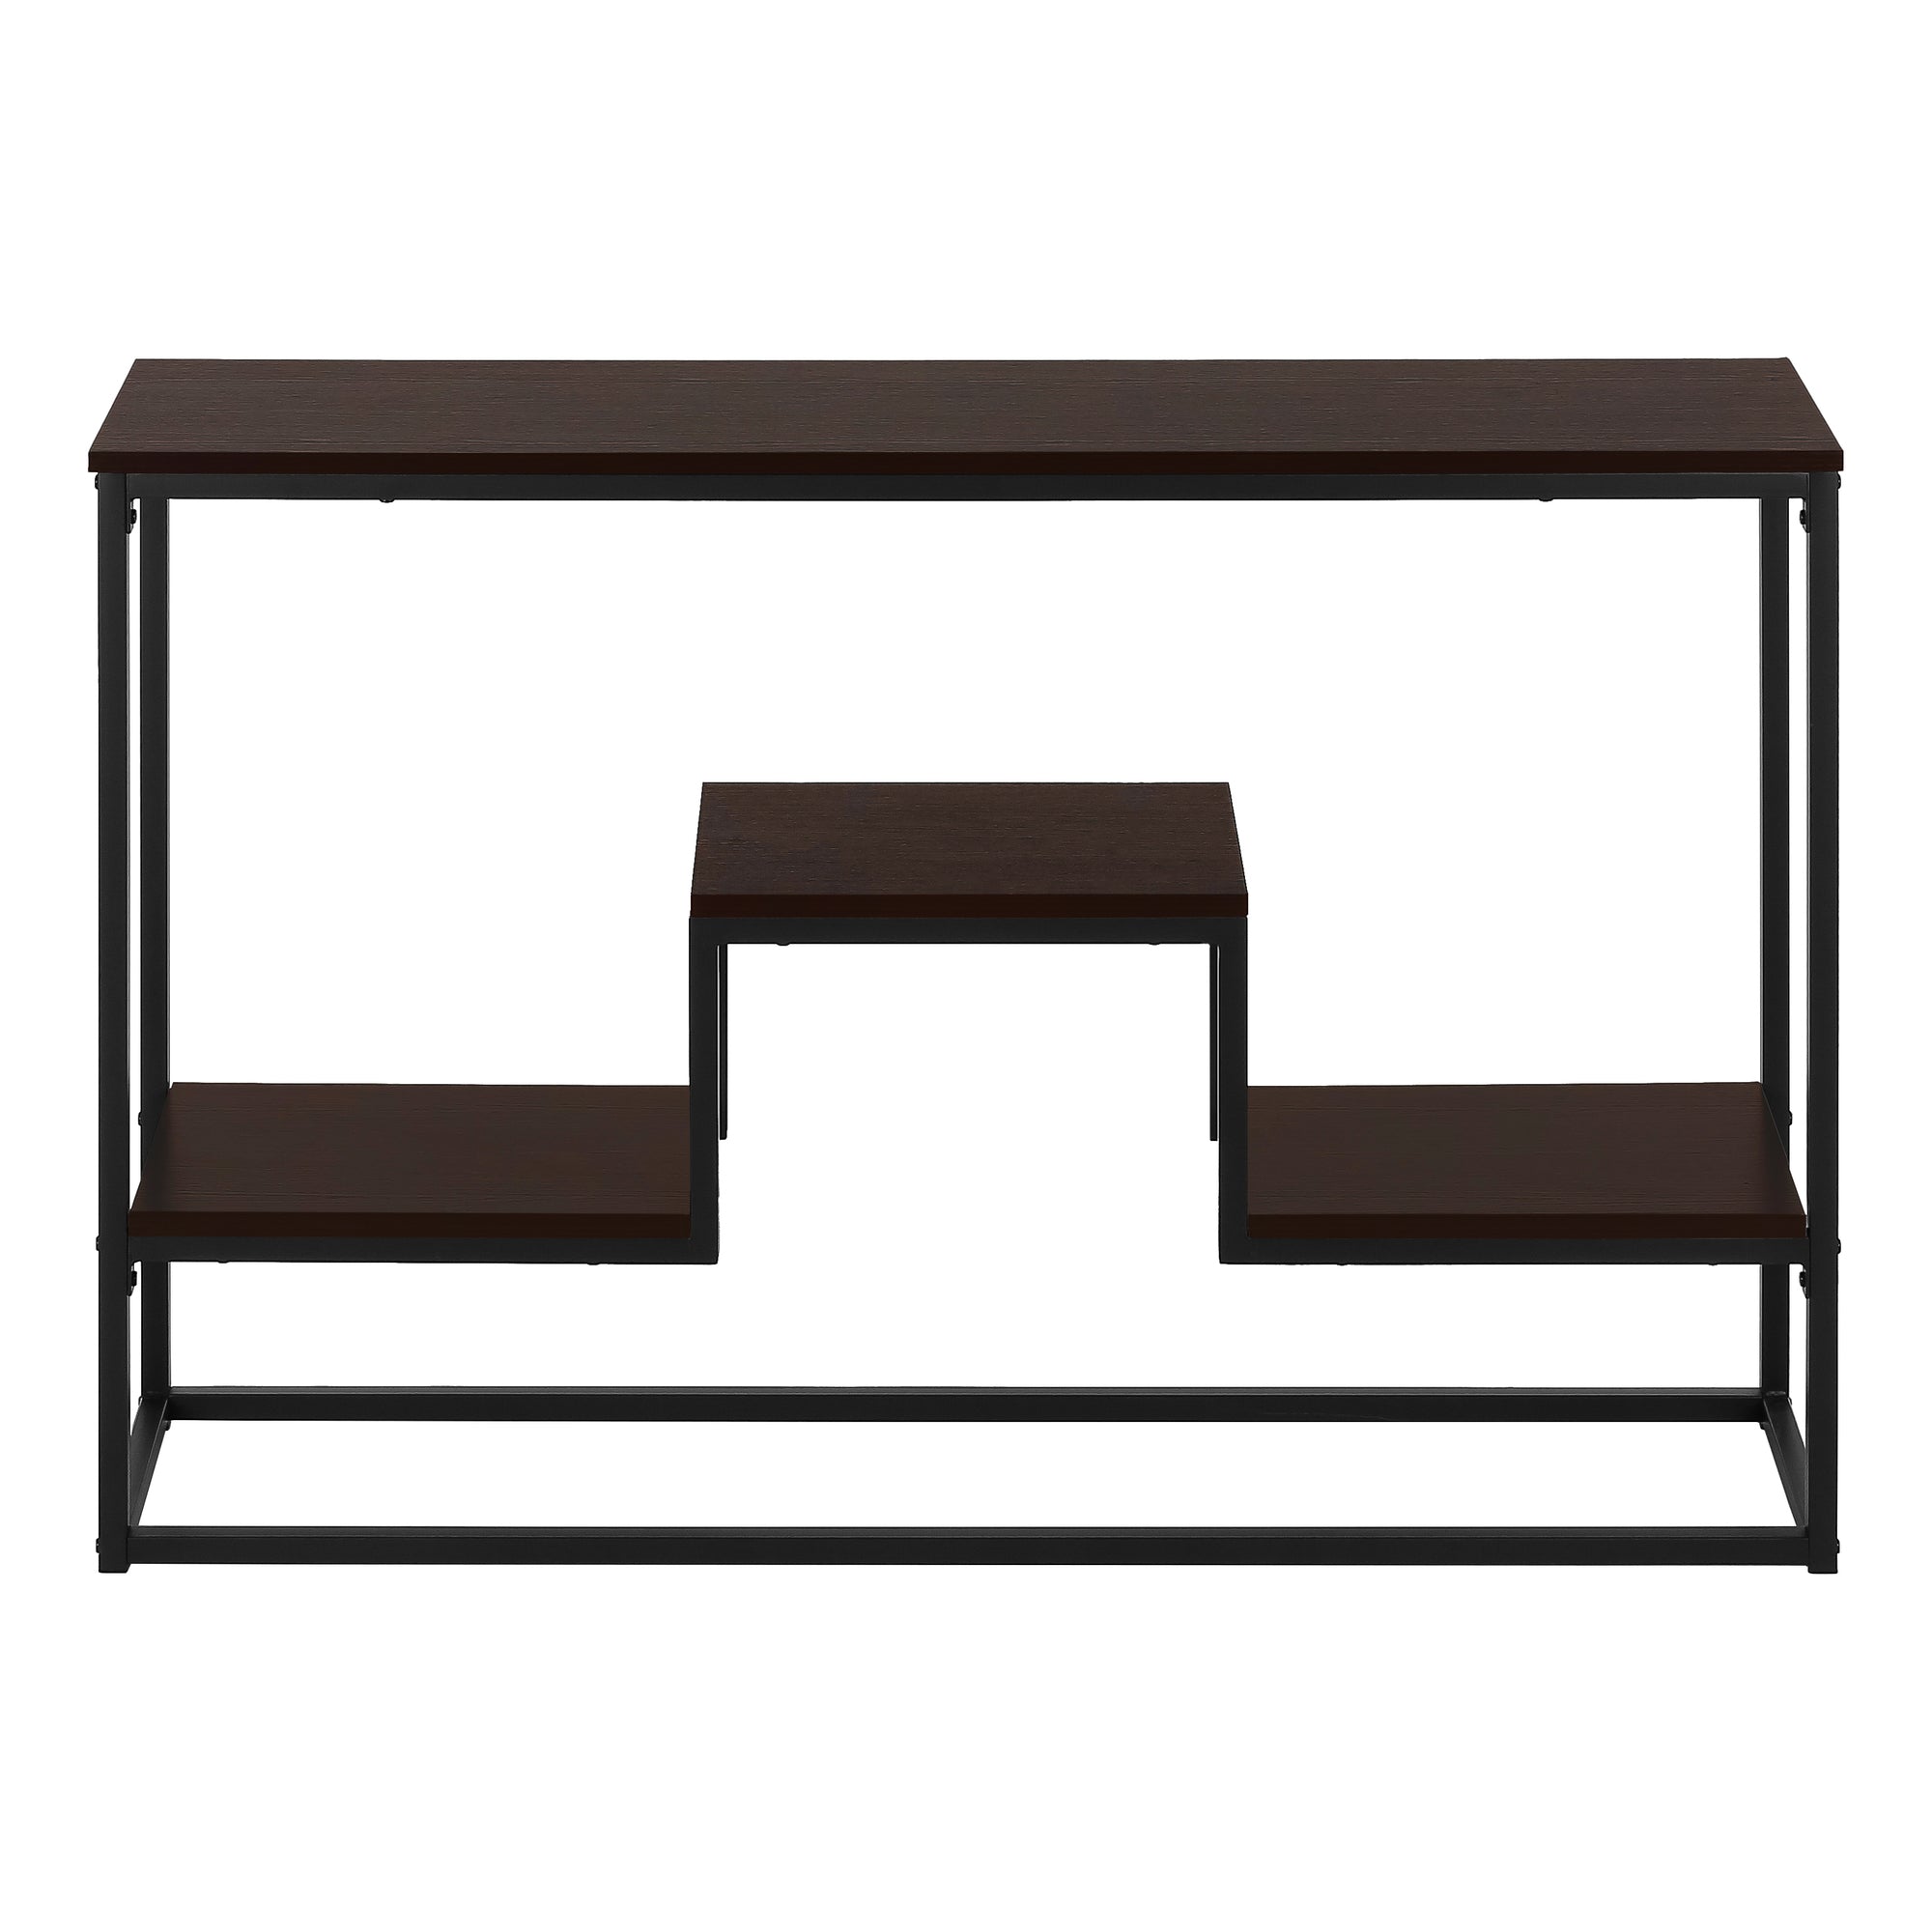 MN-453582    Accent Table, Console, Entryway, Narrow, Sofa, Living Room, Bedroom, Metal Frame, Laminate, Dark Brown, Black, Contemporary, Modern